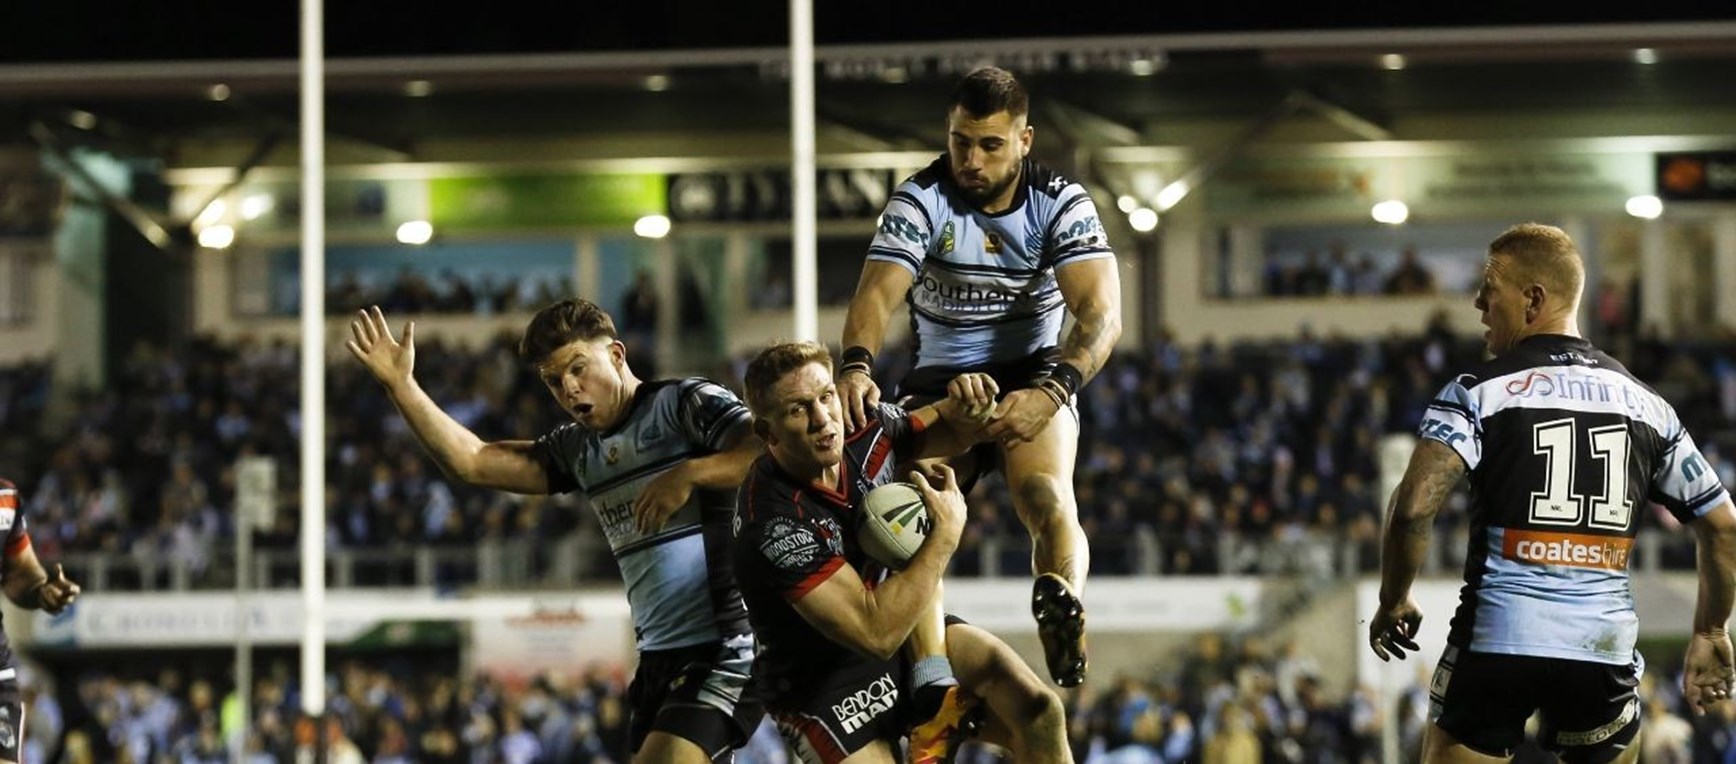 IN PICTURES | Loss to Cronulla